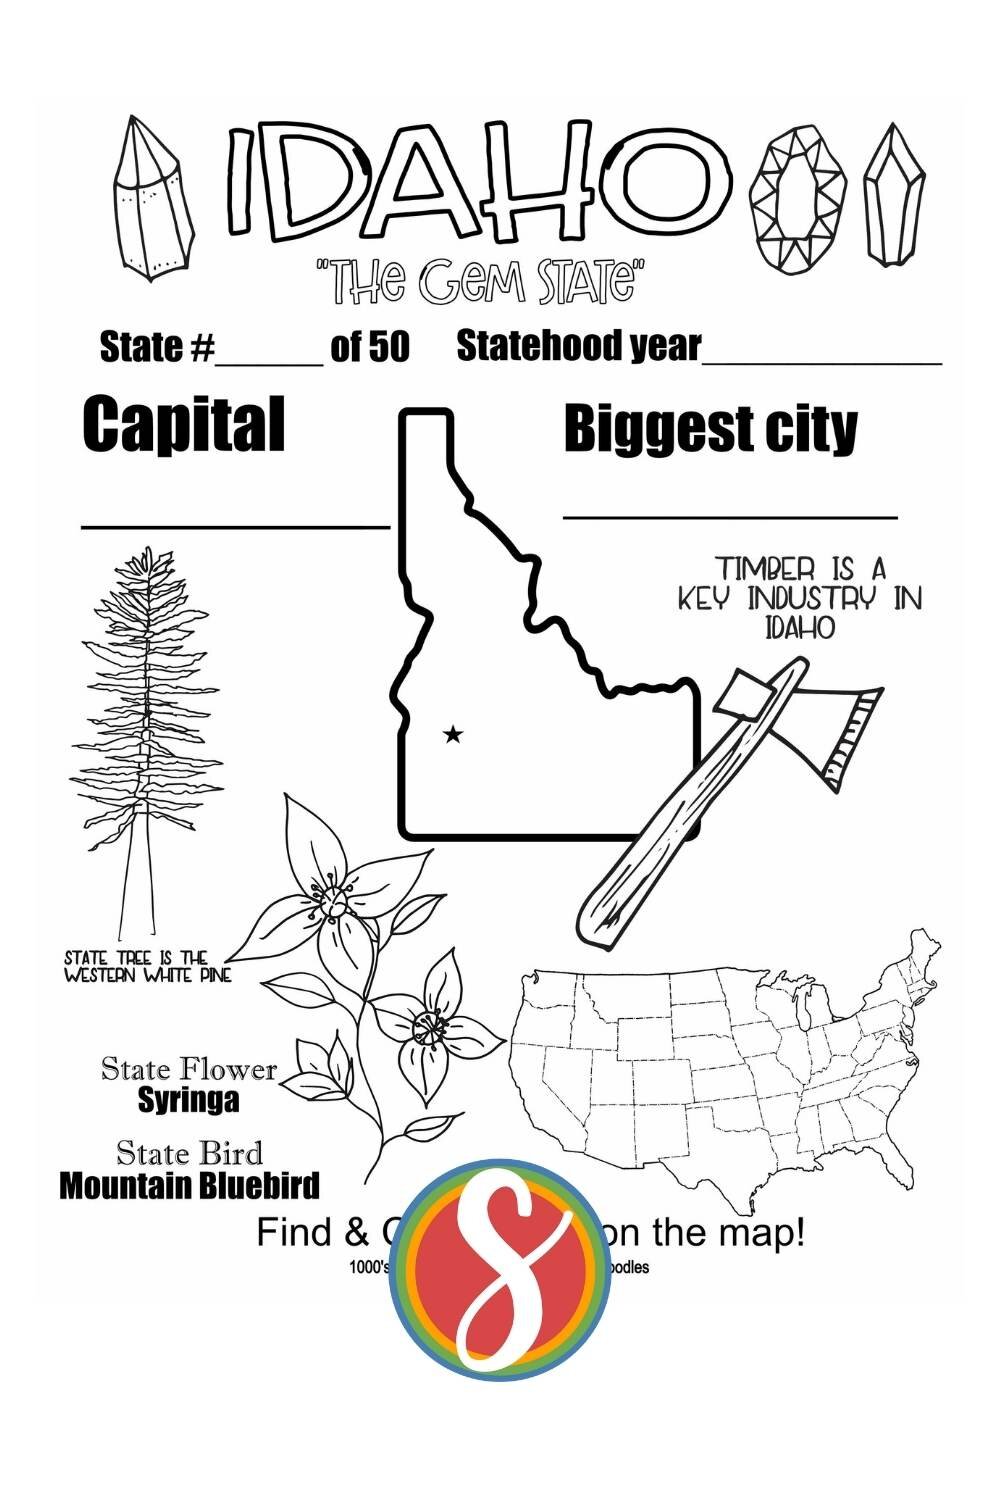 Idaho facts - a free activity coloring page about Idahofrom Stevie Doodles, free to print and color. Find 1000’s of free printable coloring sheets of all kinds at Stevie Doodles